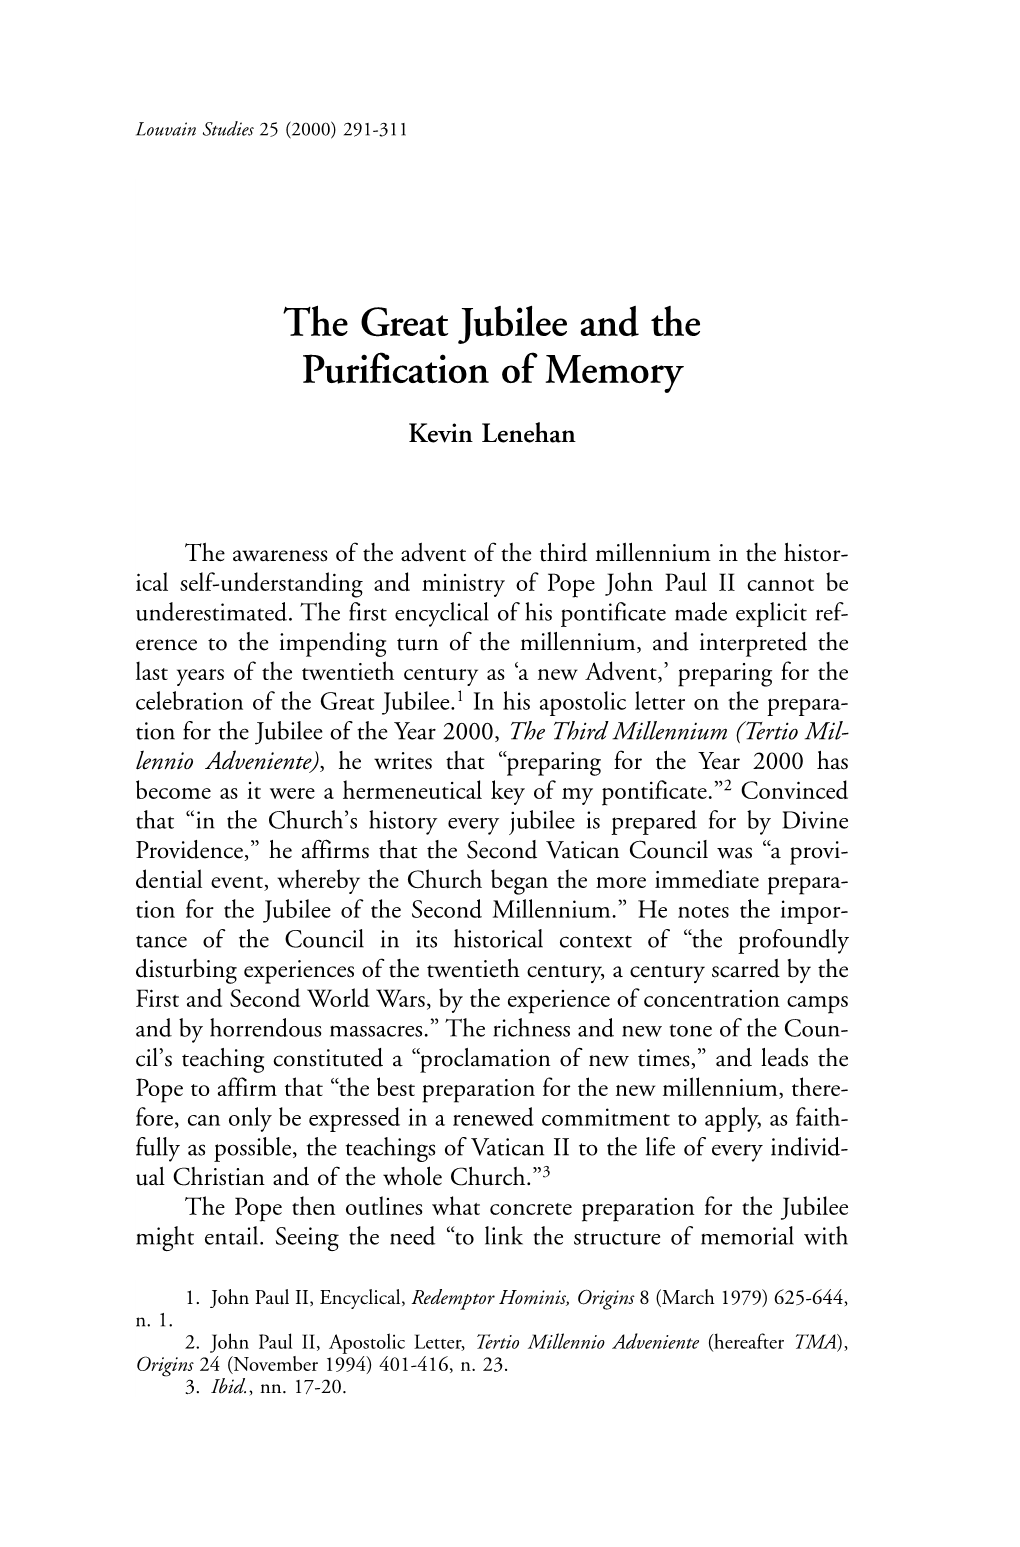 The Great Jubilee and the Purification of Memory Kevin Lenehan